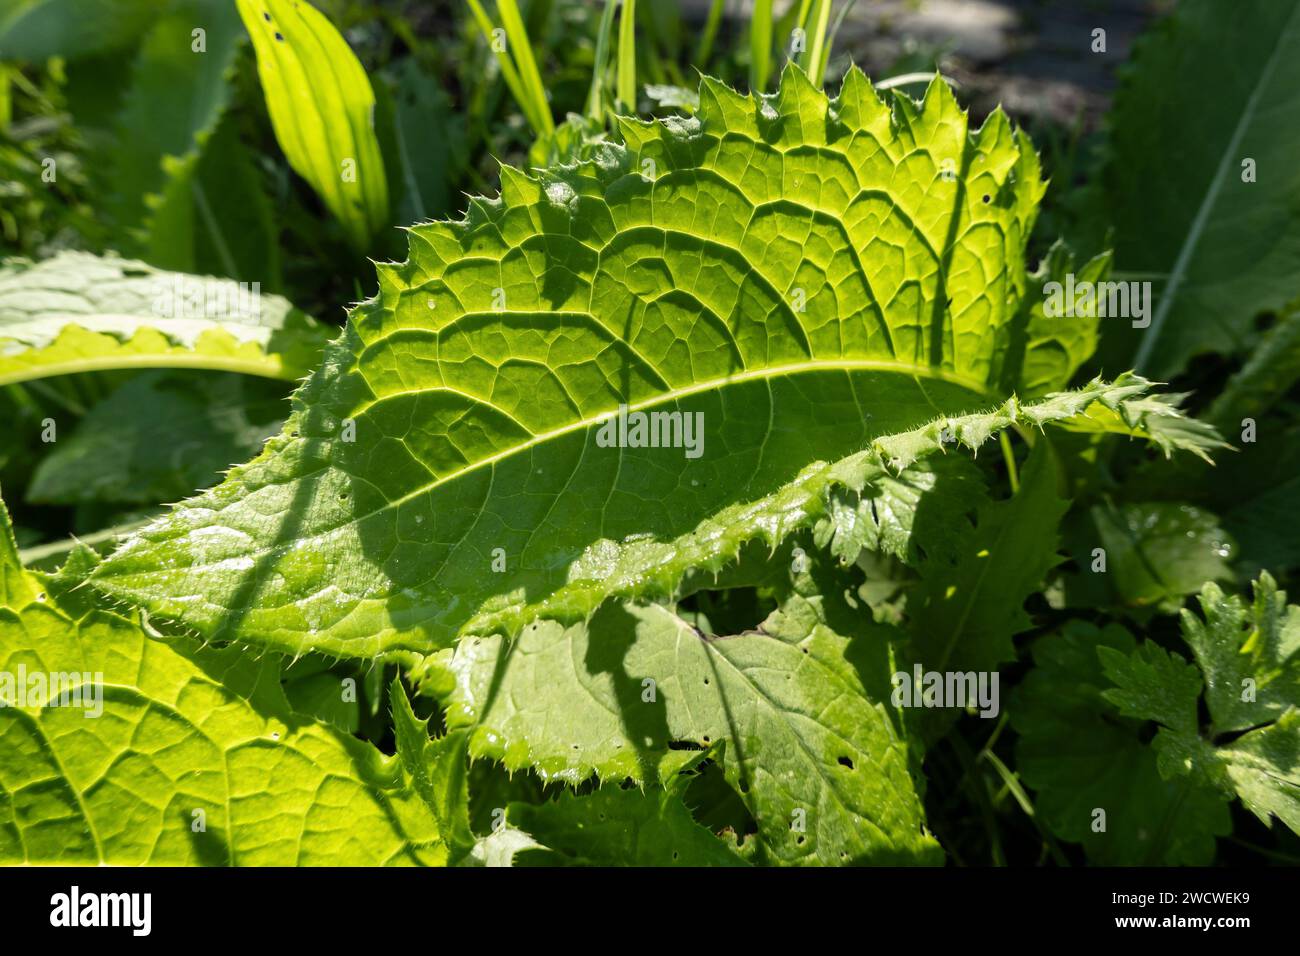 Siberian cabbage thistle (Cirsium oleraceum) plant with shadows made by sunlight Stock Photo